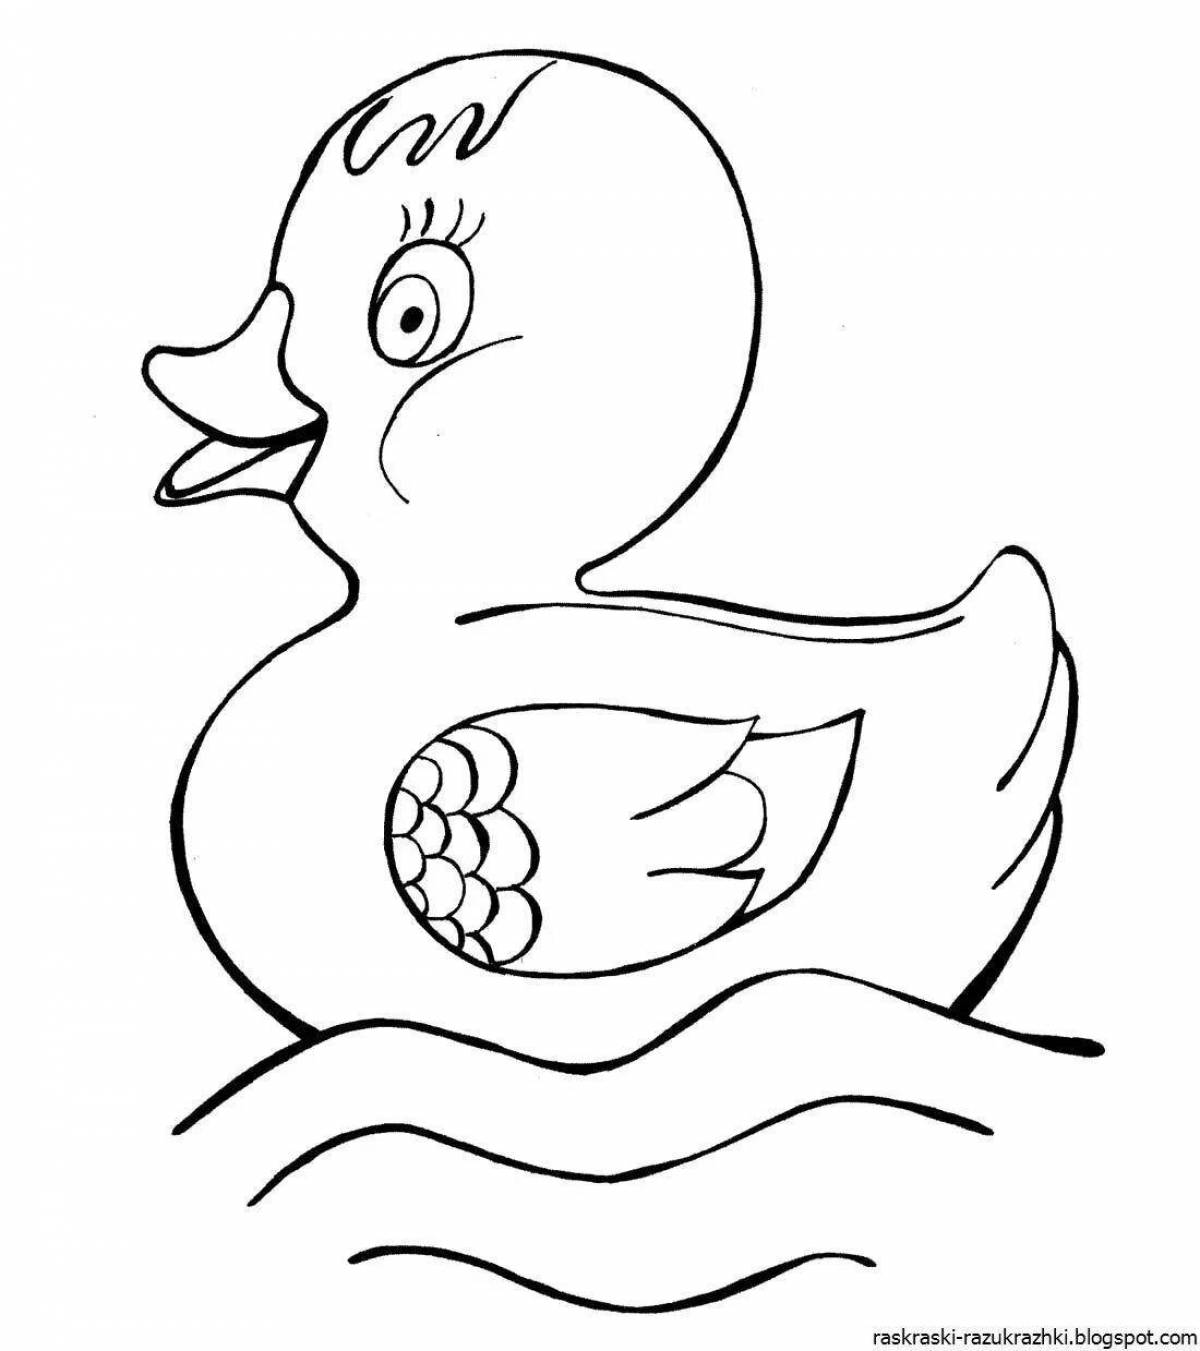 Vibrant duck coloring book for 3-4 year olds